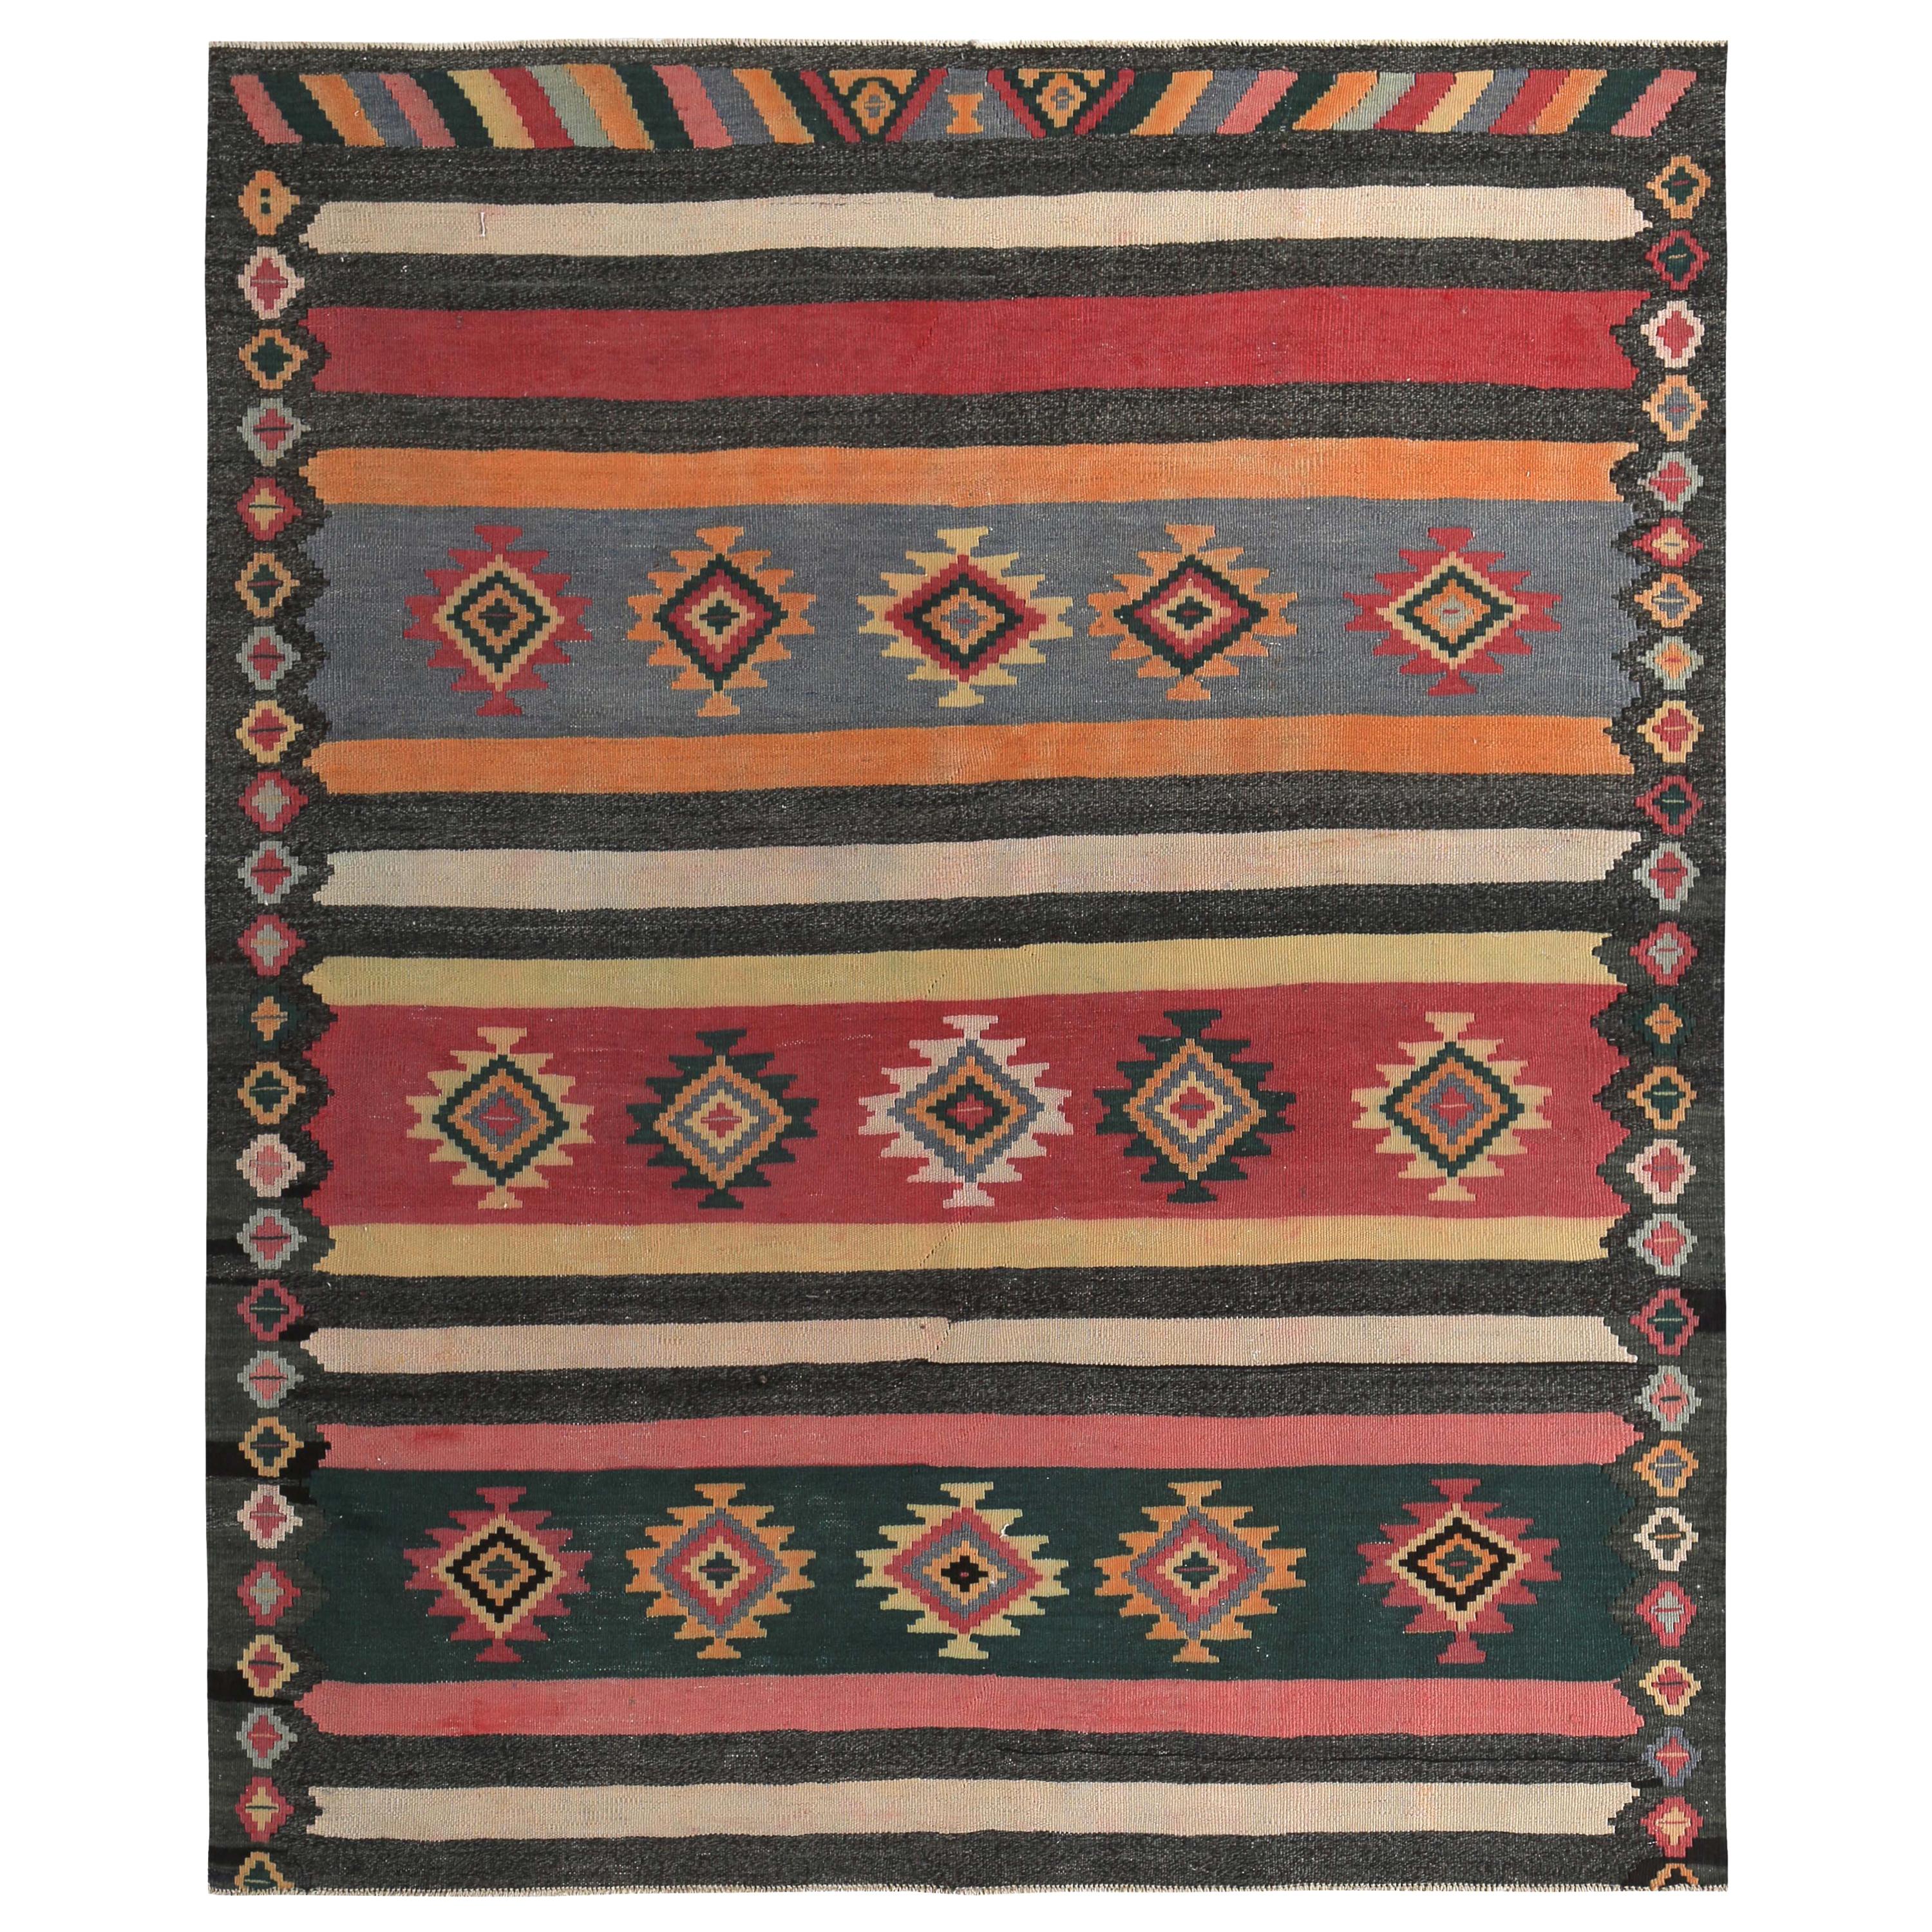 Modern Turkish Kilim Rug with Red, Blue, Brown and Orange with Tribal Diamonds For Sale